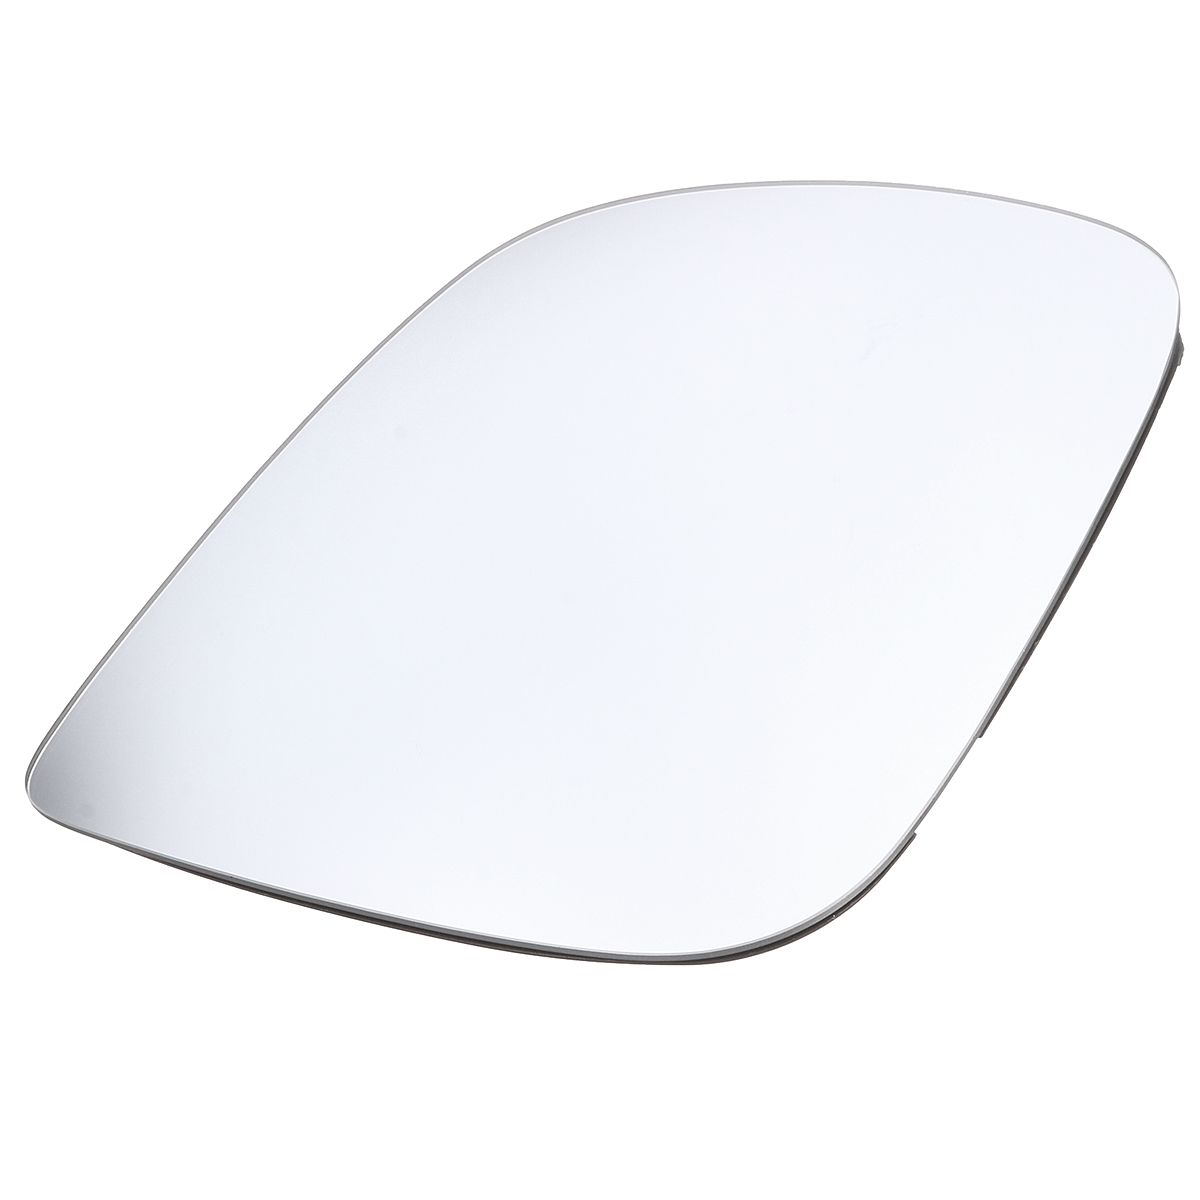 Car-Right-Passenger-Side-Door-Wing-Mirror-Glass-Heated-For-AUDI-Q5-09-17-Q7-10-15-1176571